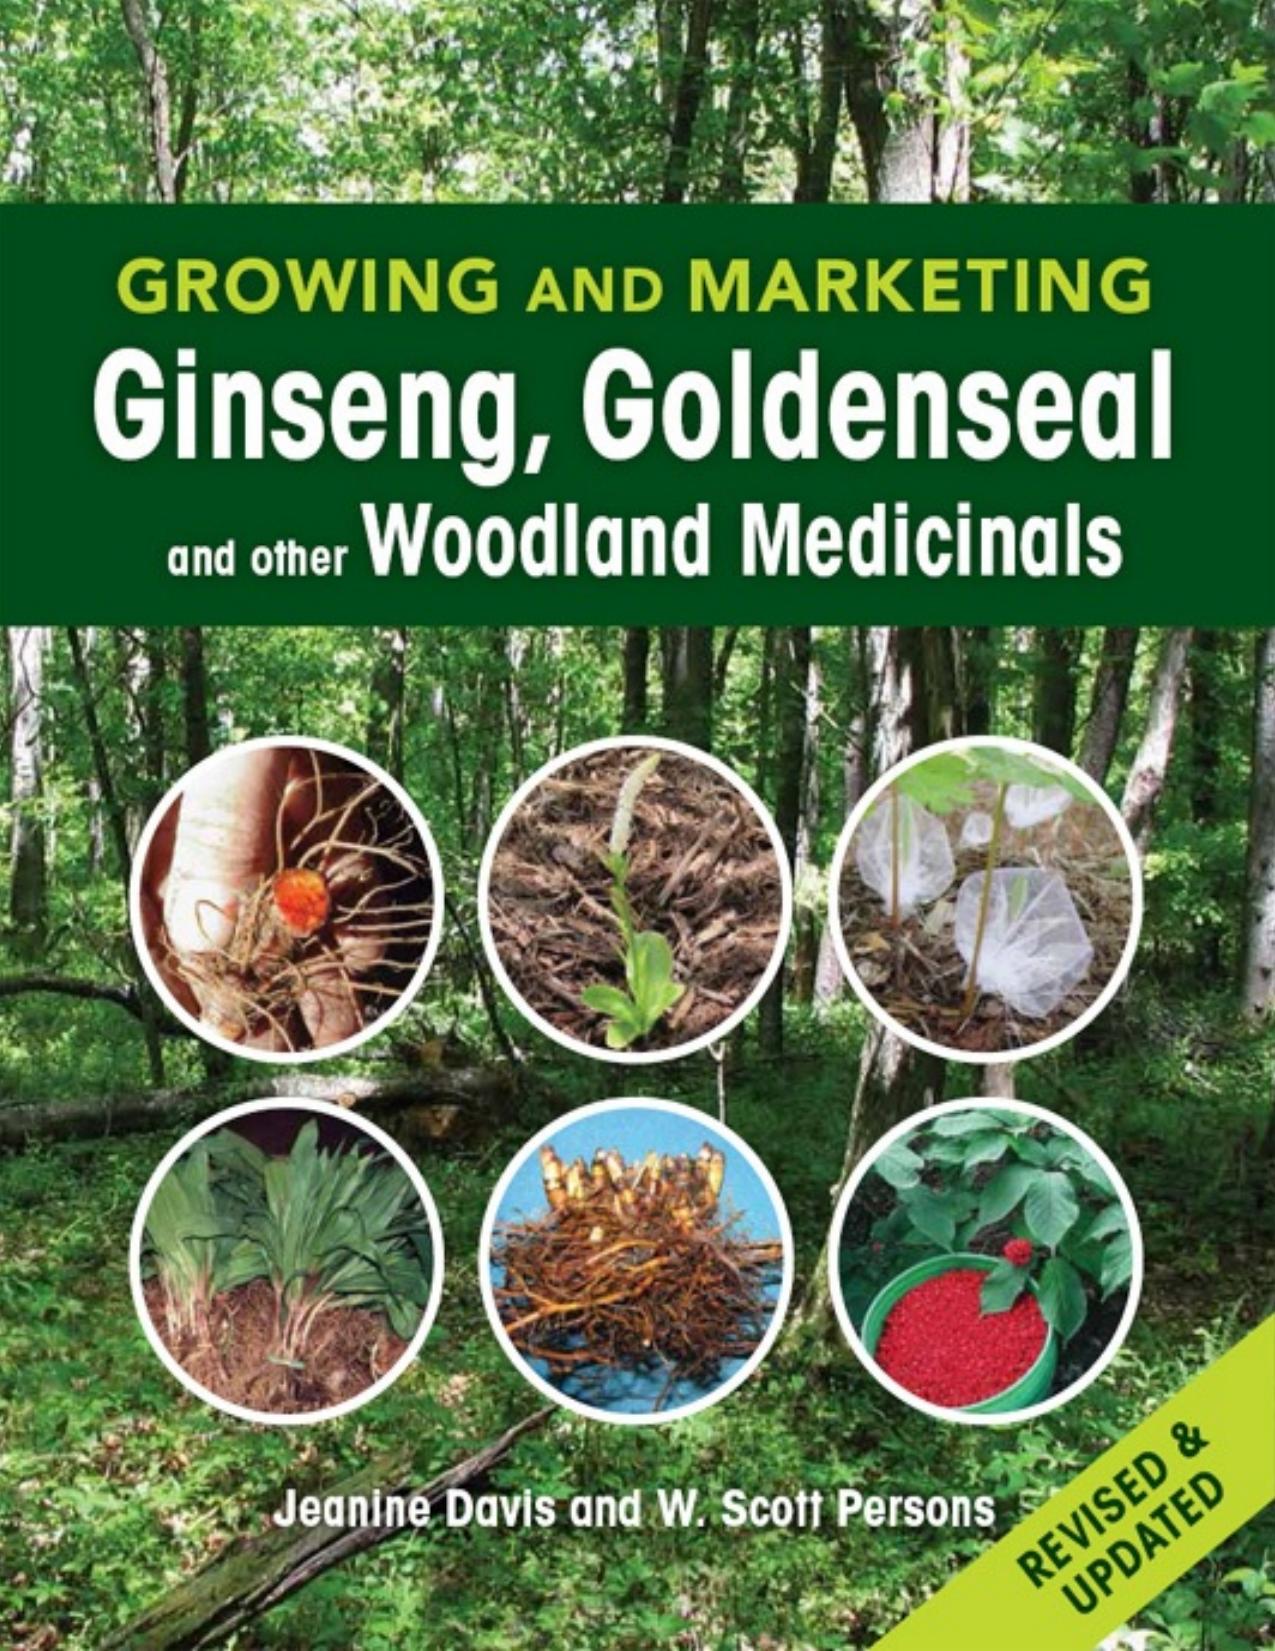 Growing and Marketing Ginseng, Goldenseal and other Woodland Medicinals by Jeanine Davis